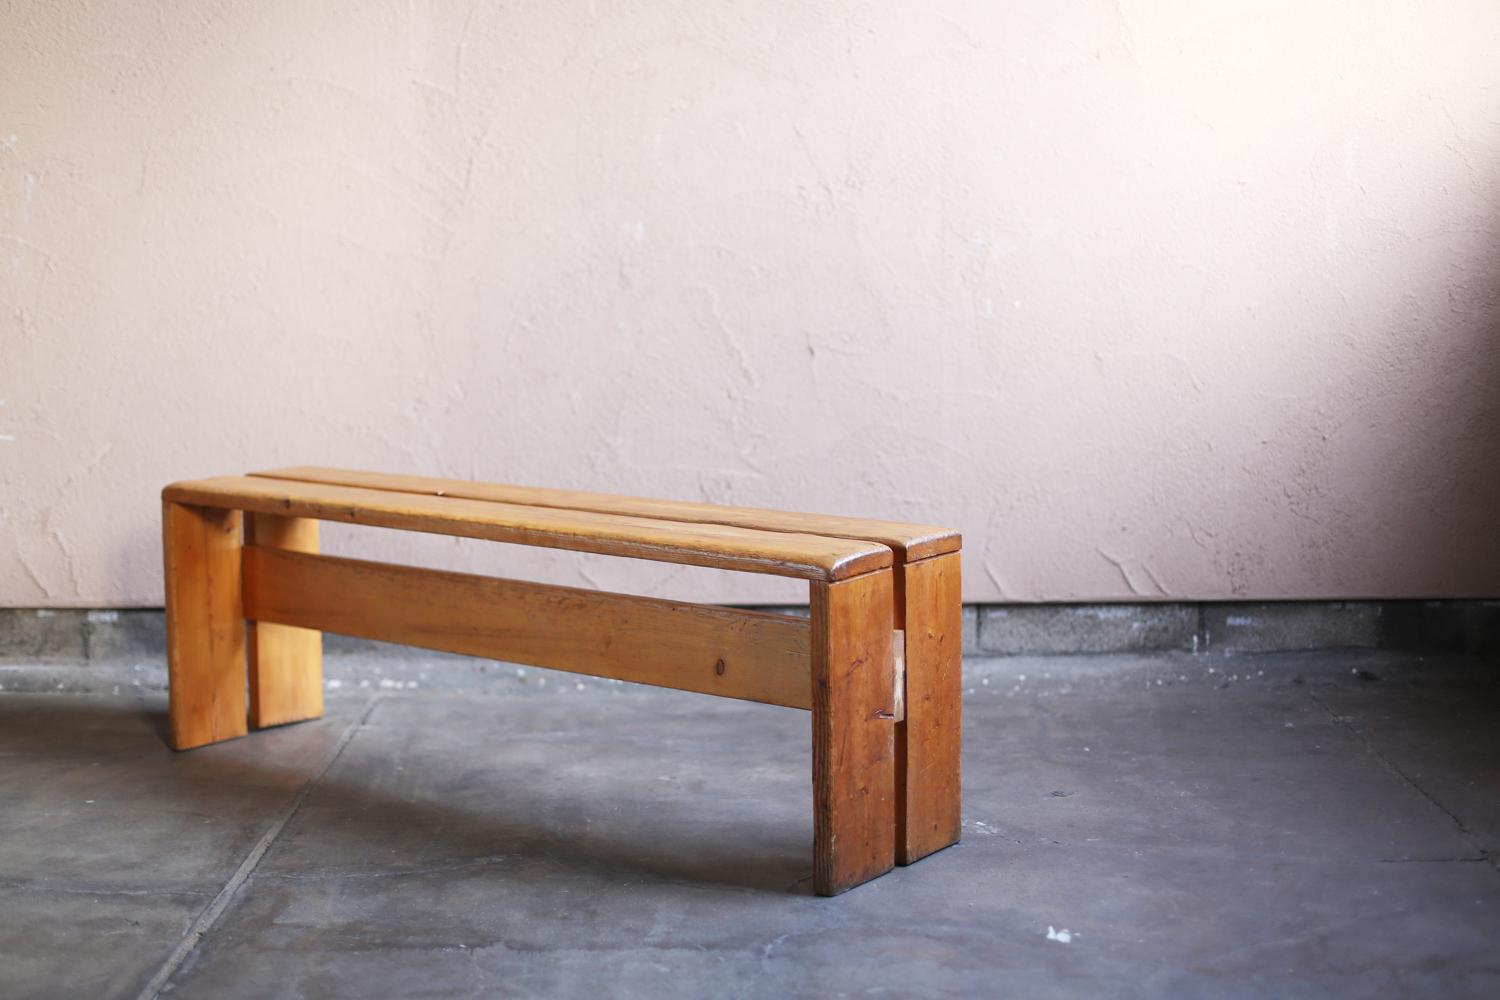 A 3 seater bench designed under the supervision of Charlotte Perriand for Les Arcs, a French ski resort.
The initial model with round dowels for the joints on the seat.